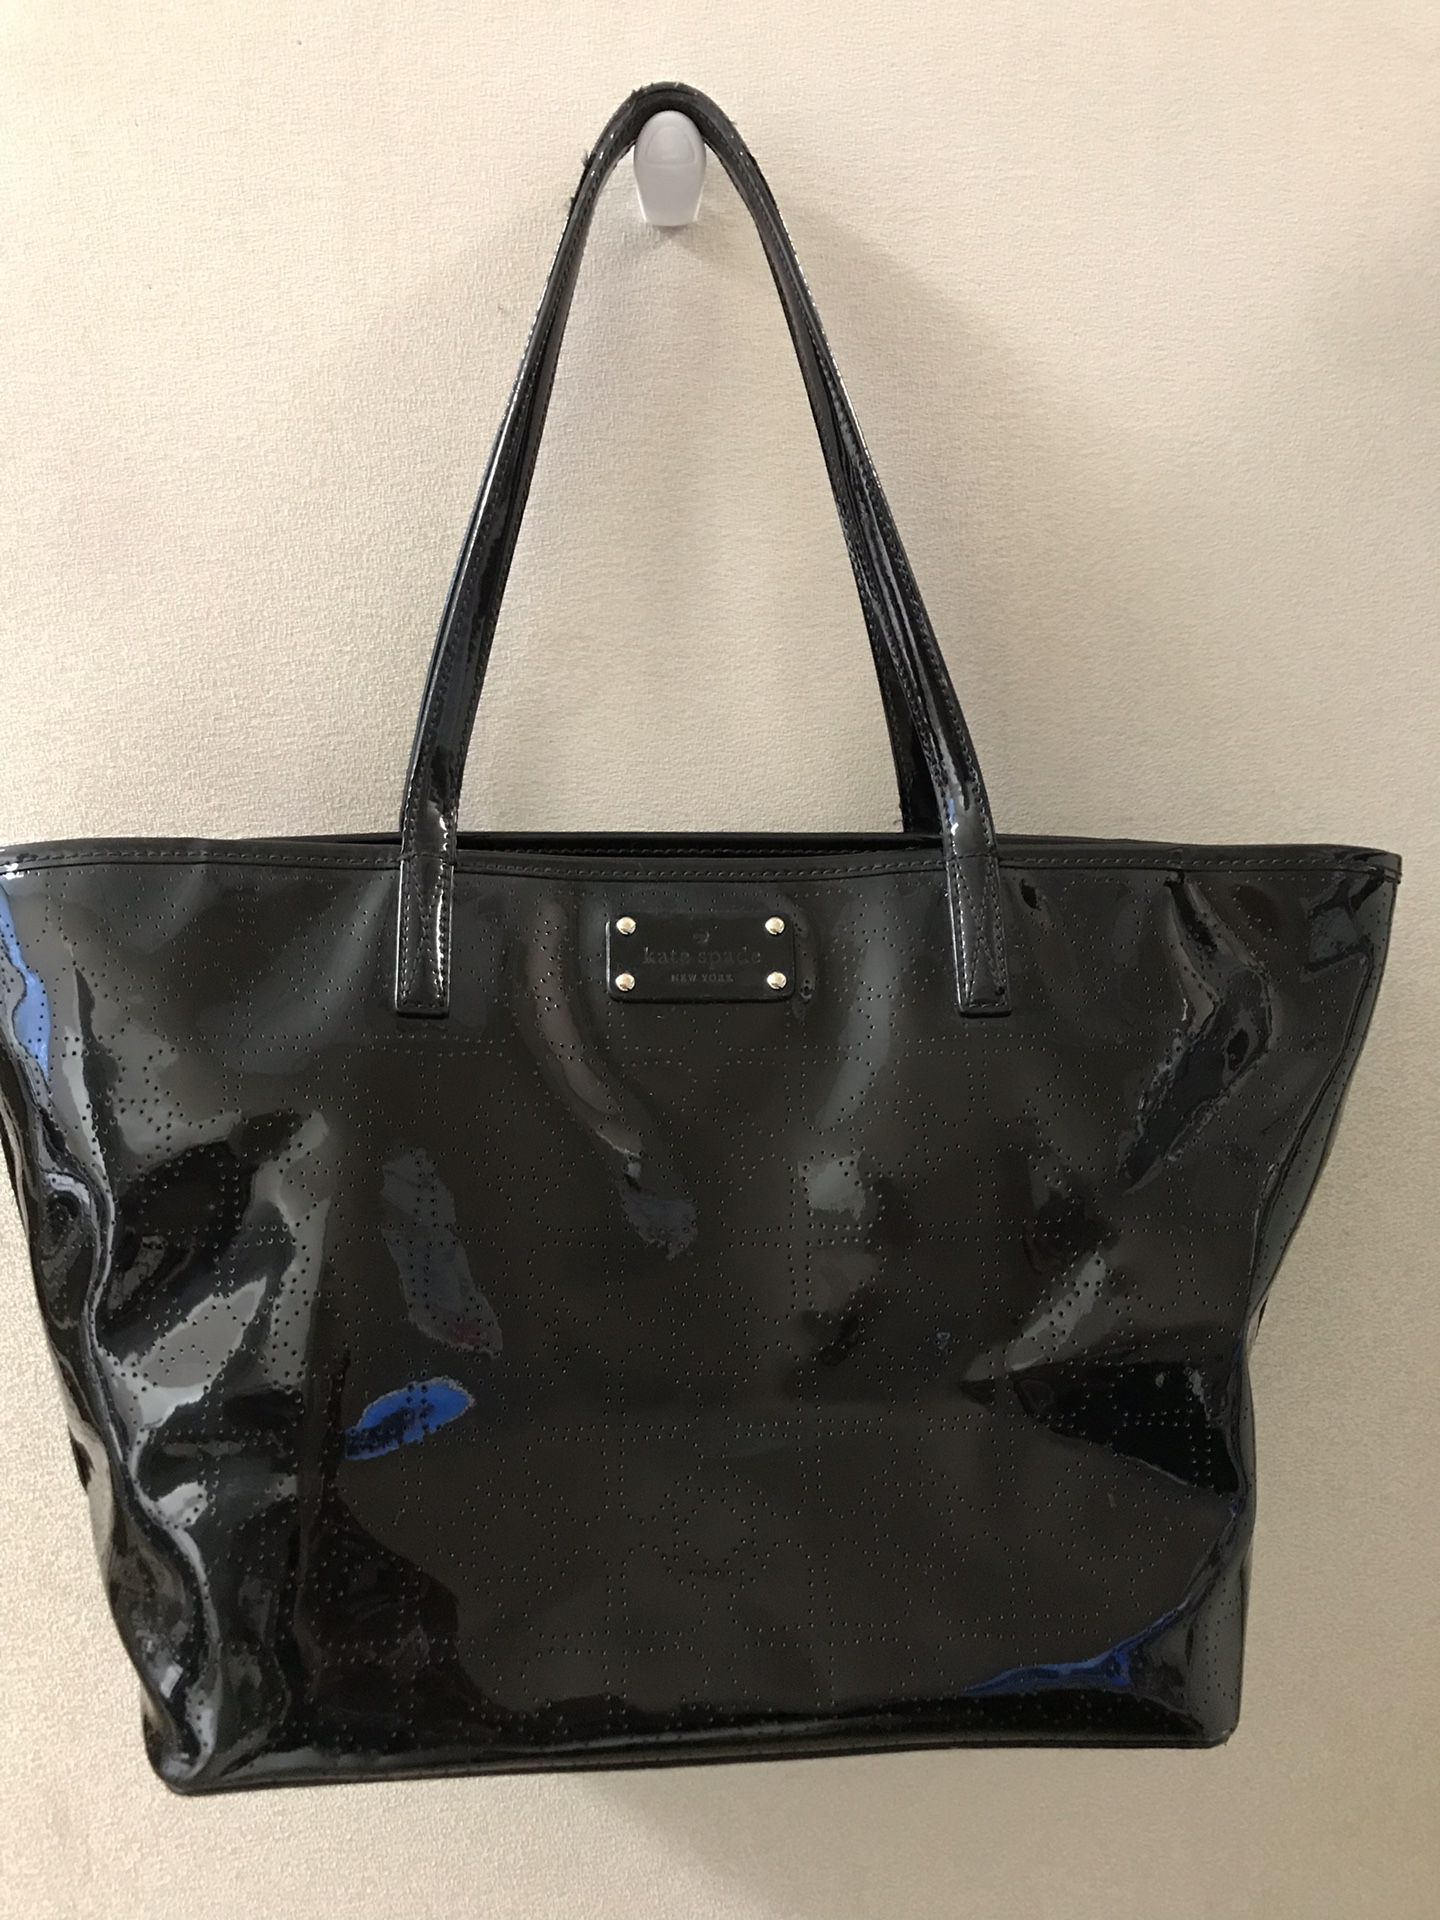 Great condition Kate spade tote bag